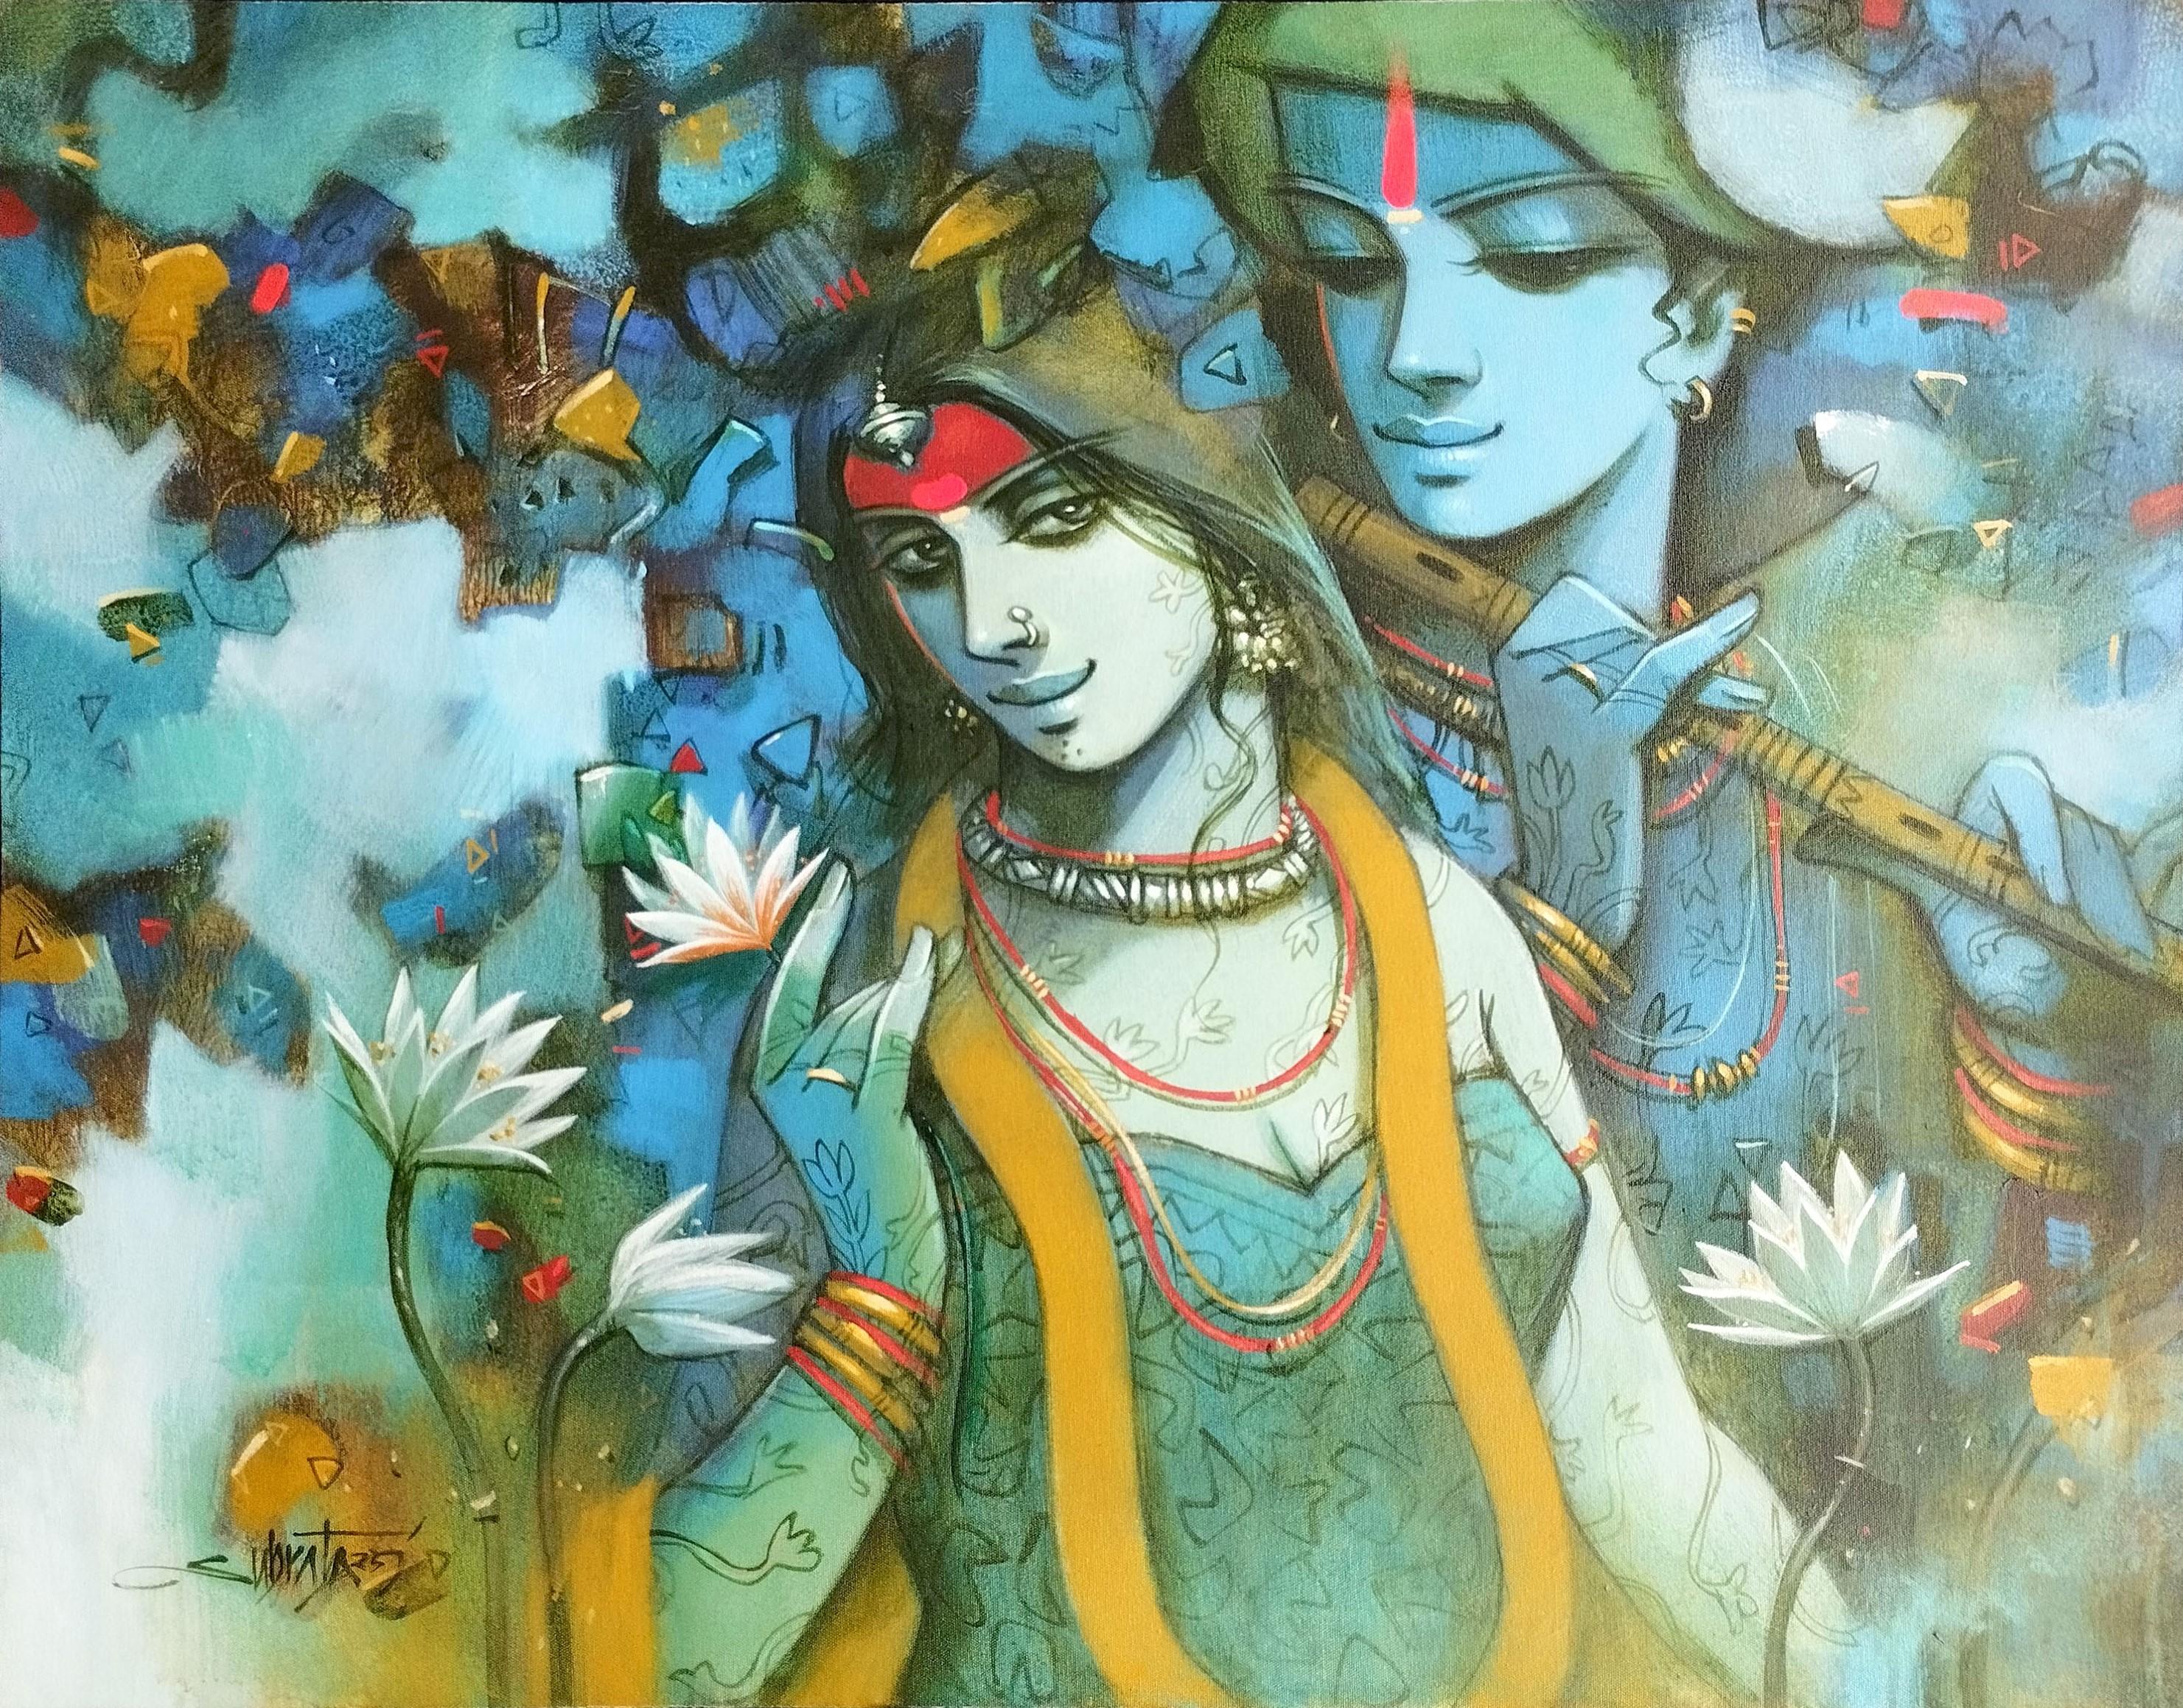 Subrata Das Figurative Painting - Tune of Love, Acrylic on Canvas by Contemporary, Red, Yellow, Blue "In Stock"